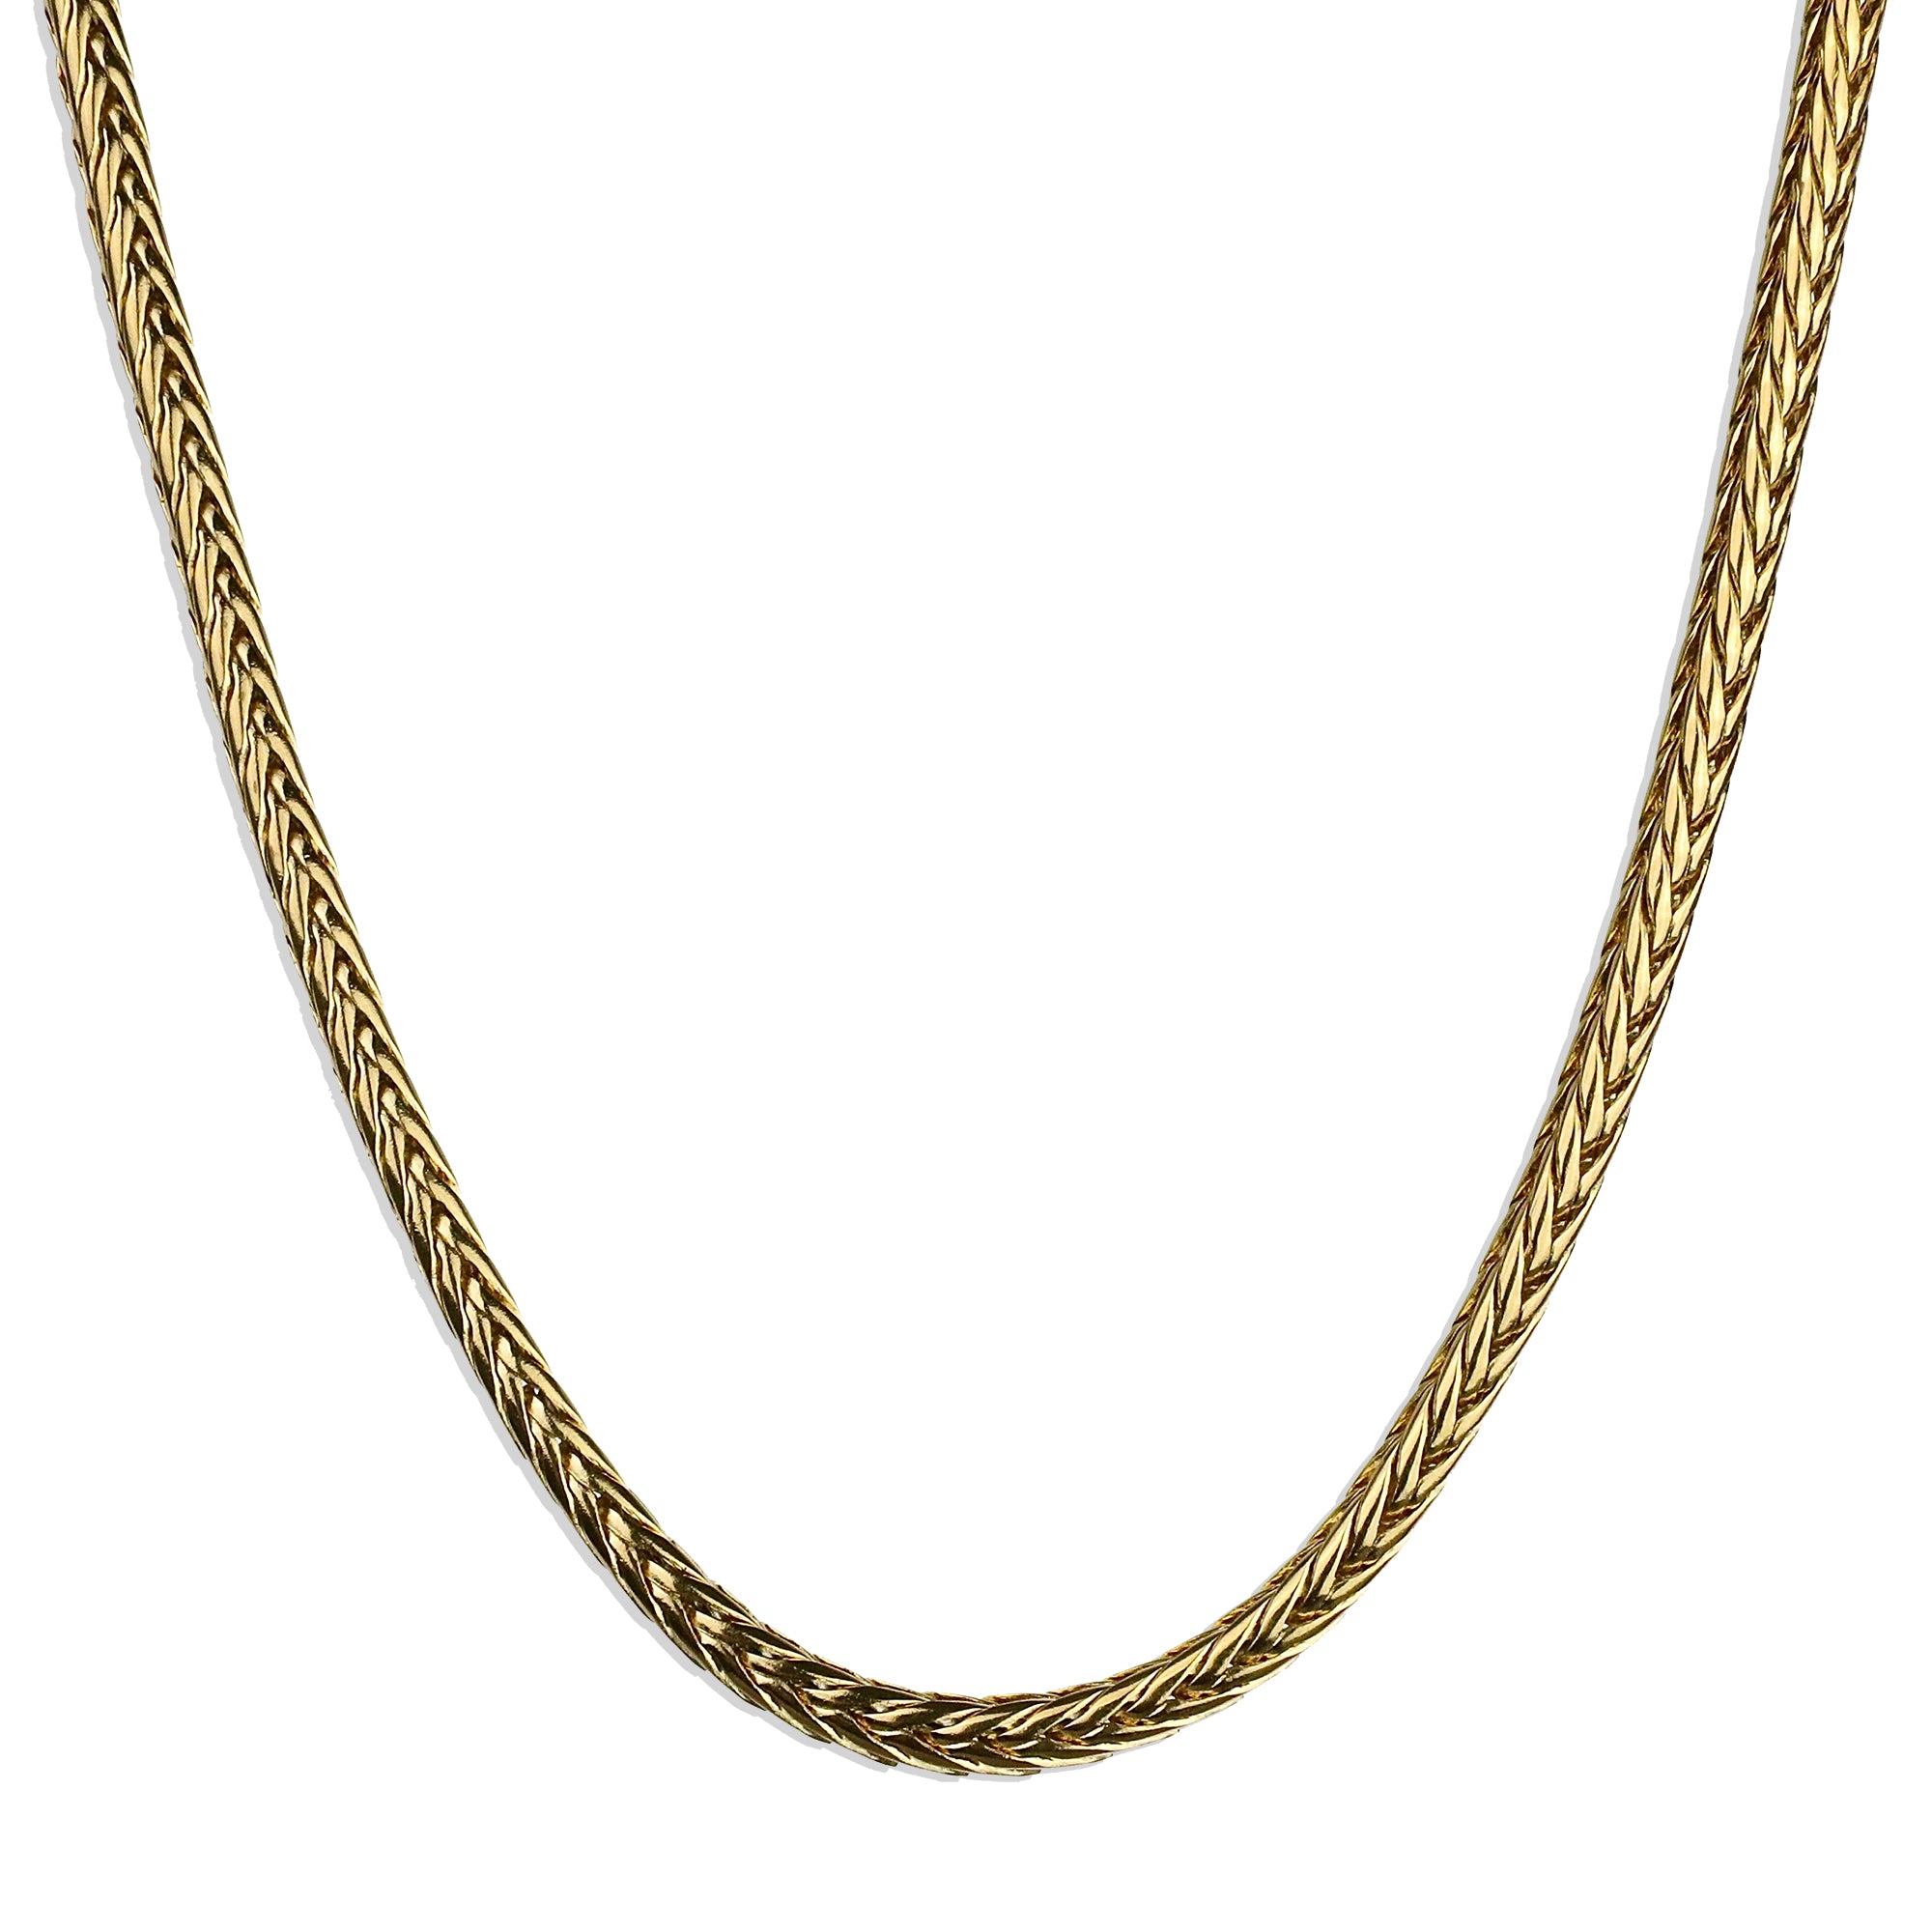 Foxtail Chain Necklace - Gold 4mm